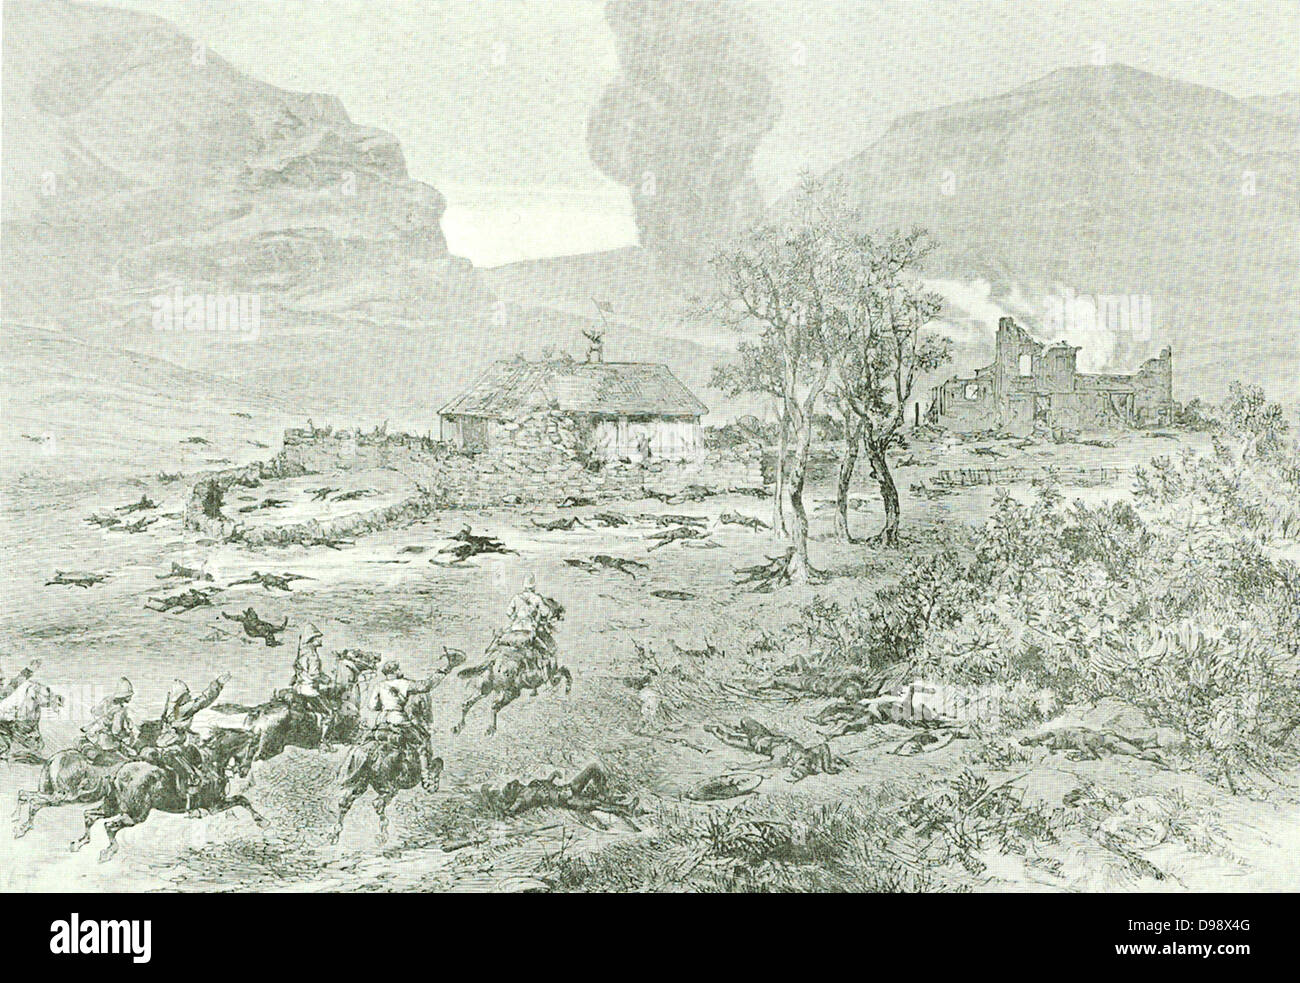 The Zulus having met with effective resistance from the British garrison of the fortified post near Rorkesdrift had retired, although they had succeeded in setting the various buildings on fire.  To the left is the house of the Rev. Witt and to the right is the house used as a Hospital.  On the foreground, to the left, the mounted men, under Lieut Col Russell, galloping up to the Hospital to rescue the beleaguered garrison. Stock Photo